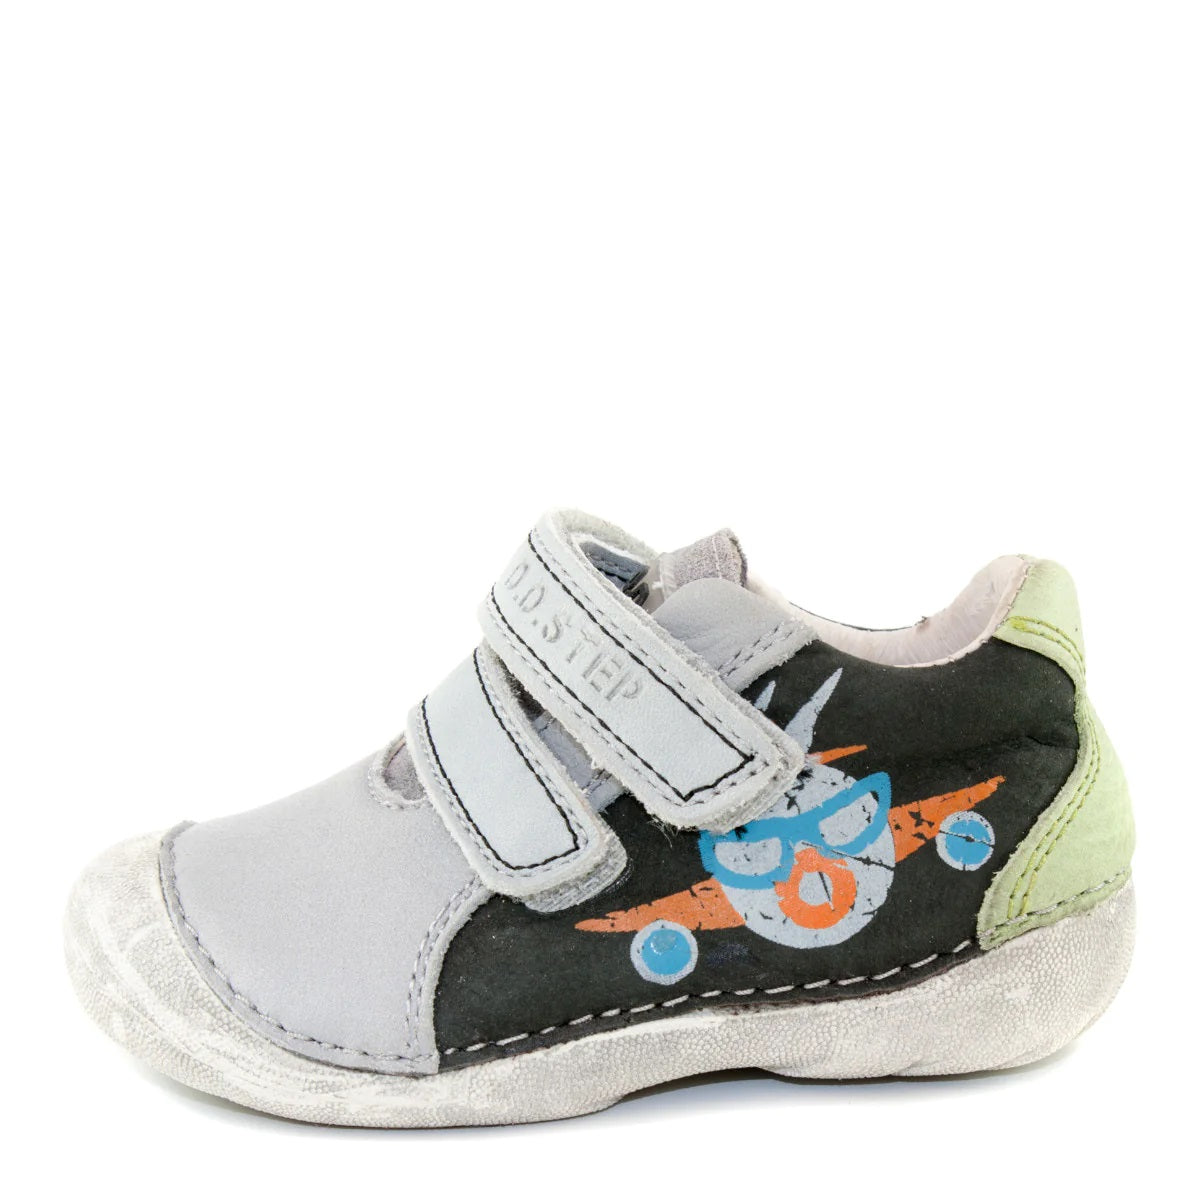 Premium quality first walker with genuine leather lining and upper grey and khaki with airplane pattern. Thanks to its high level of specialization, D.D. Step knows exactly what your child’s feet need, to develop properly in the various phases of growth. The exceptional comfort these shoes provide assure the well-being and happiness of your child.